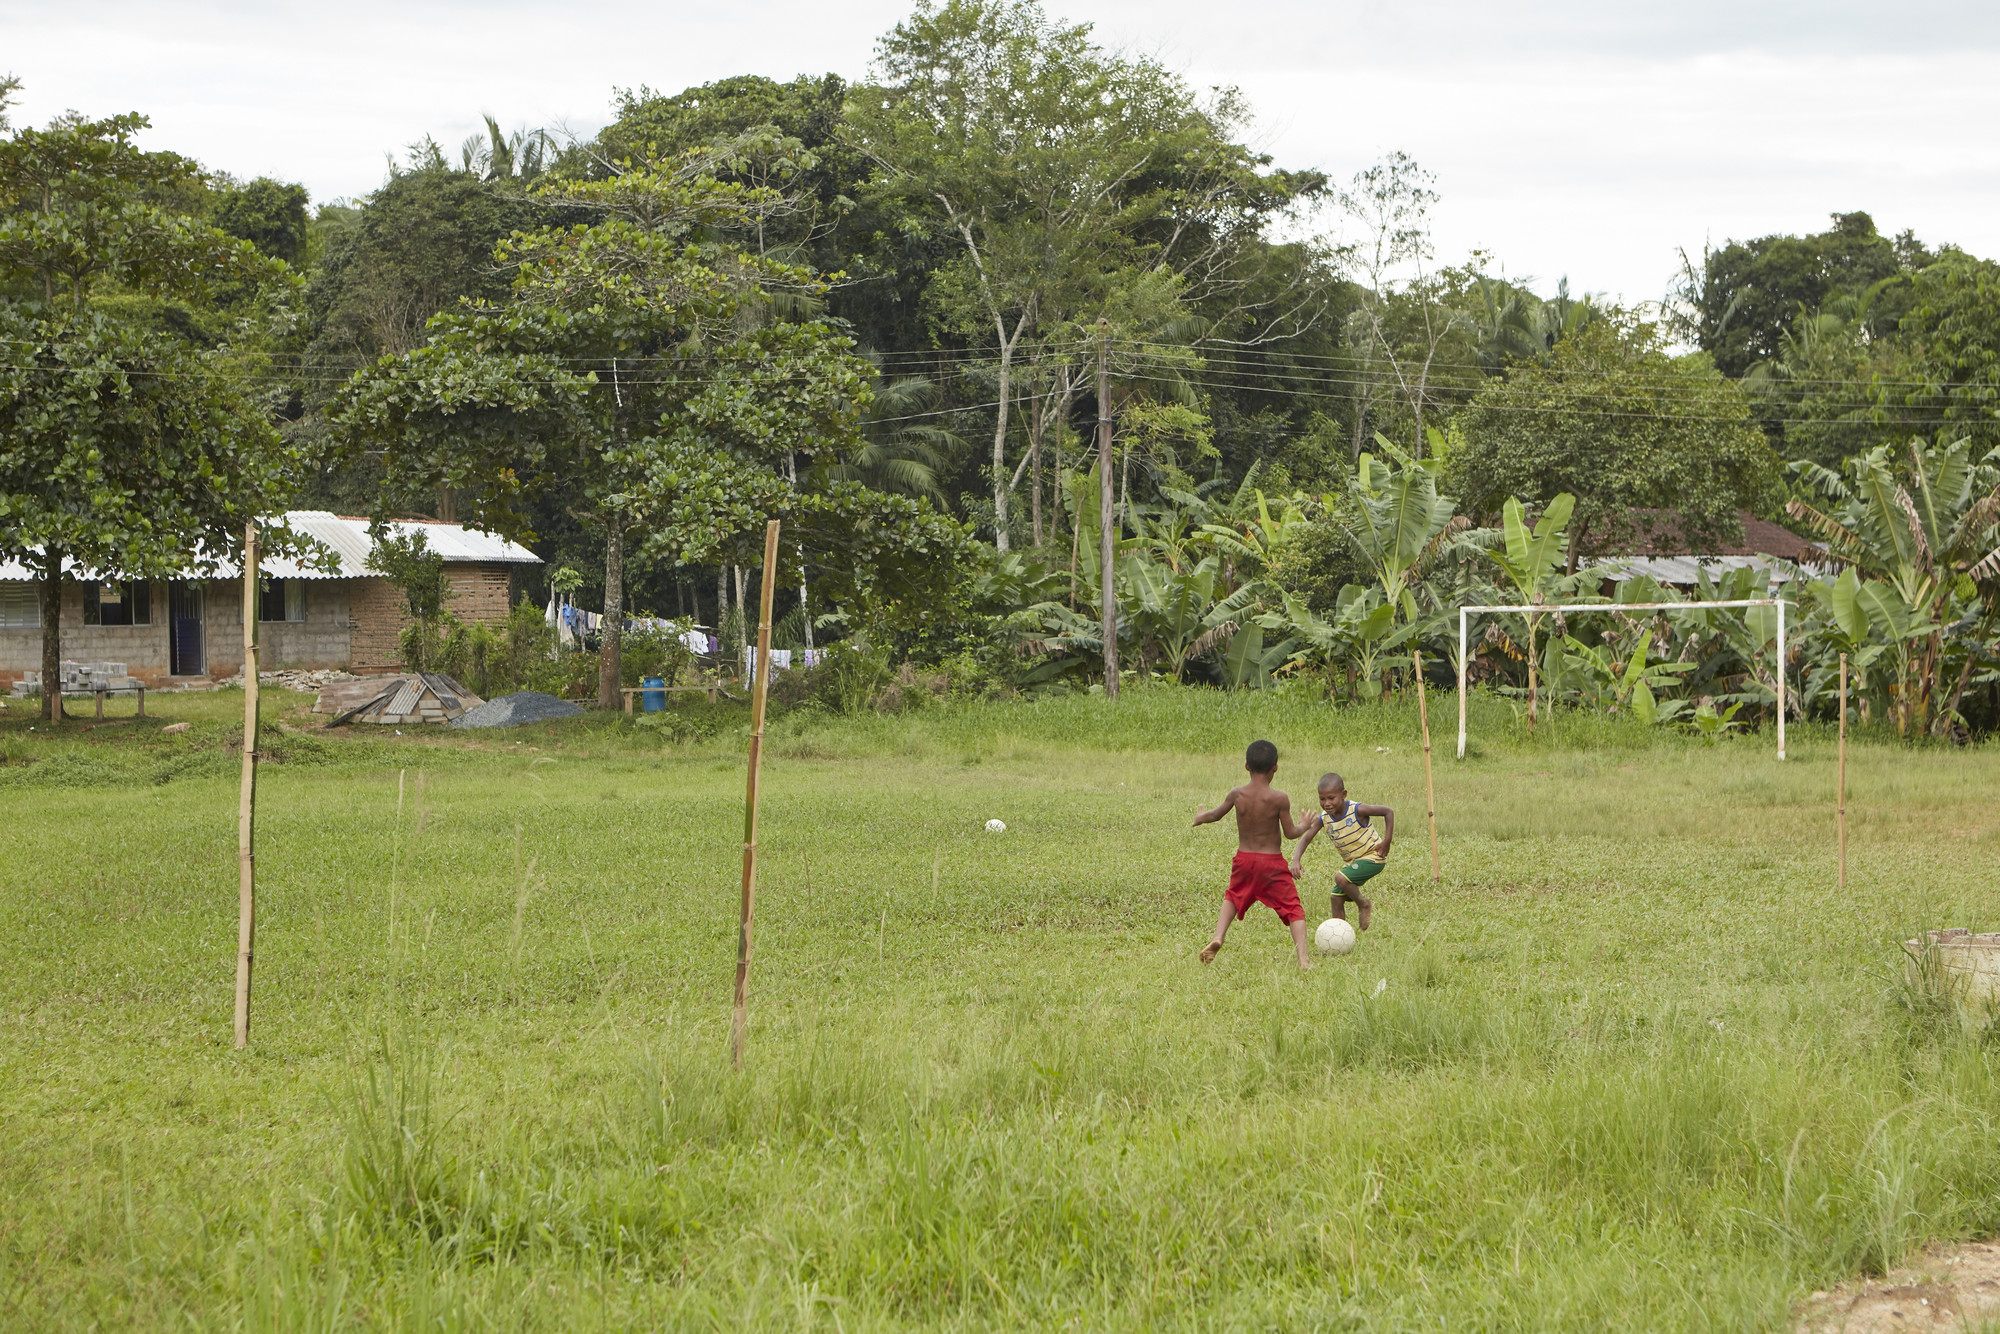 Children playing football, Quilombo São Pedro. Capture of content for the campaign "It's time for the roça", in defense of quilombola roças. The campaign aimed to pressure the state government to issue licenses for the opening of new swiddens, highlighting the importance of the traditional way of planting and the right of quilombolas to their own territory @Agê Barros / ISA